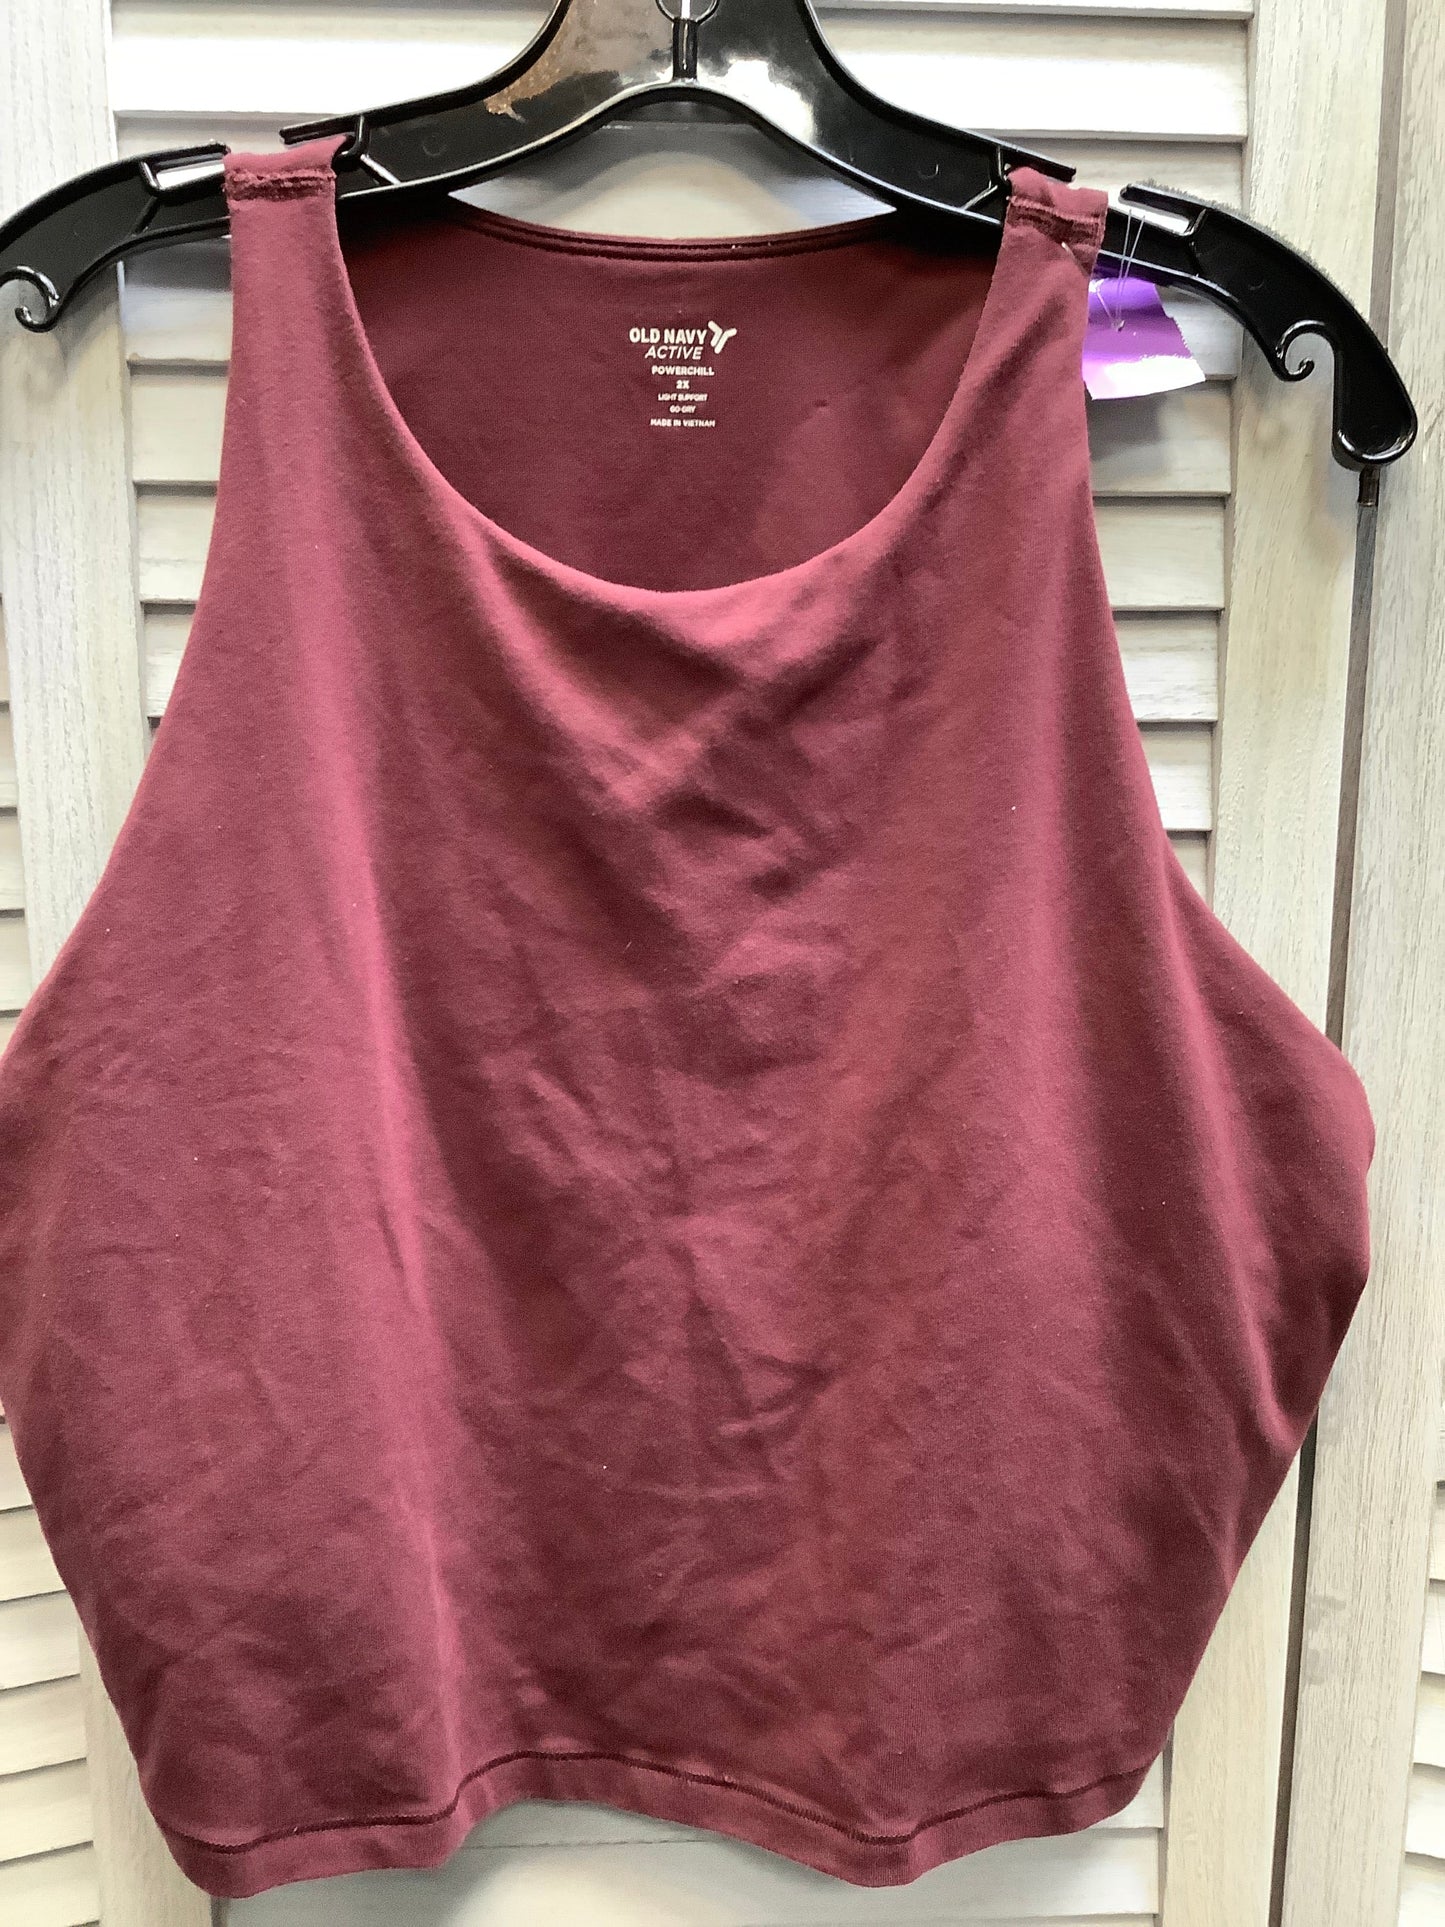 Rose Gold Athletic Tank Top Old Navy, Size 2x